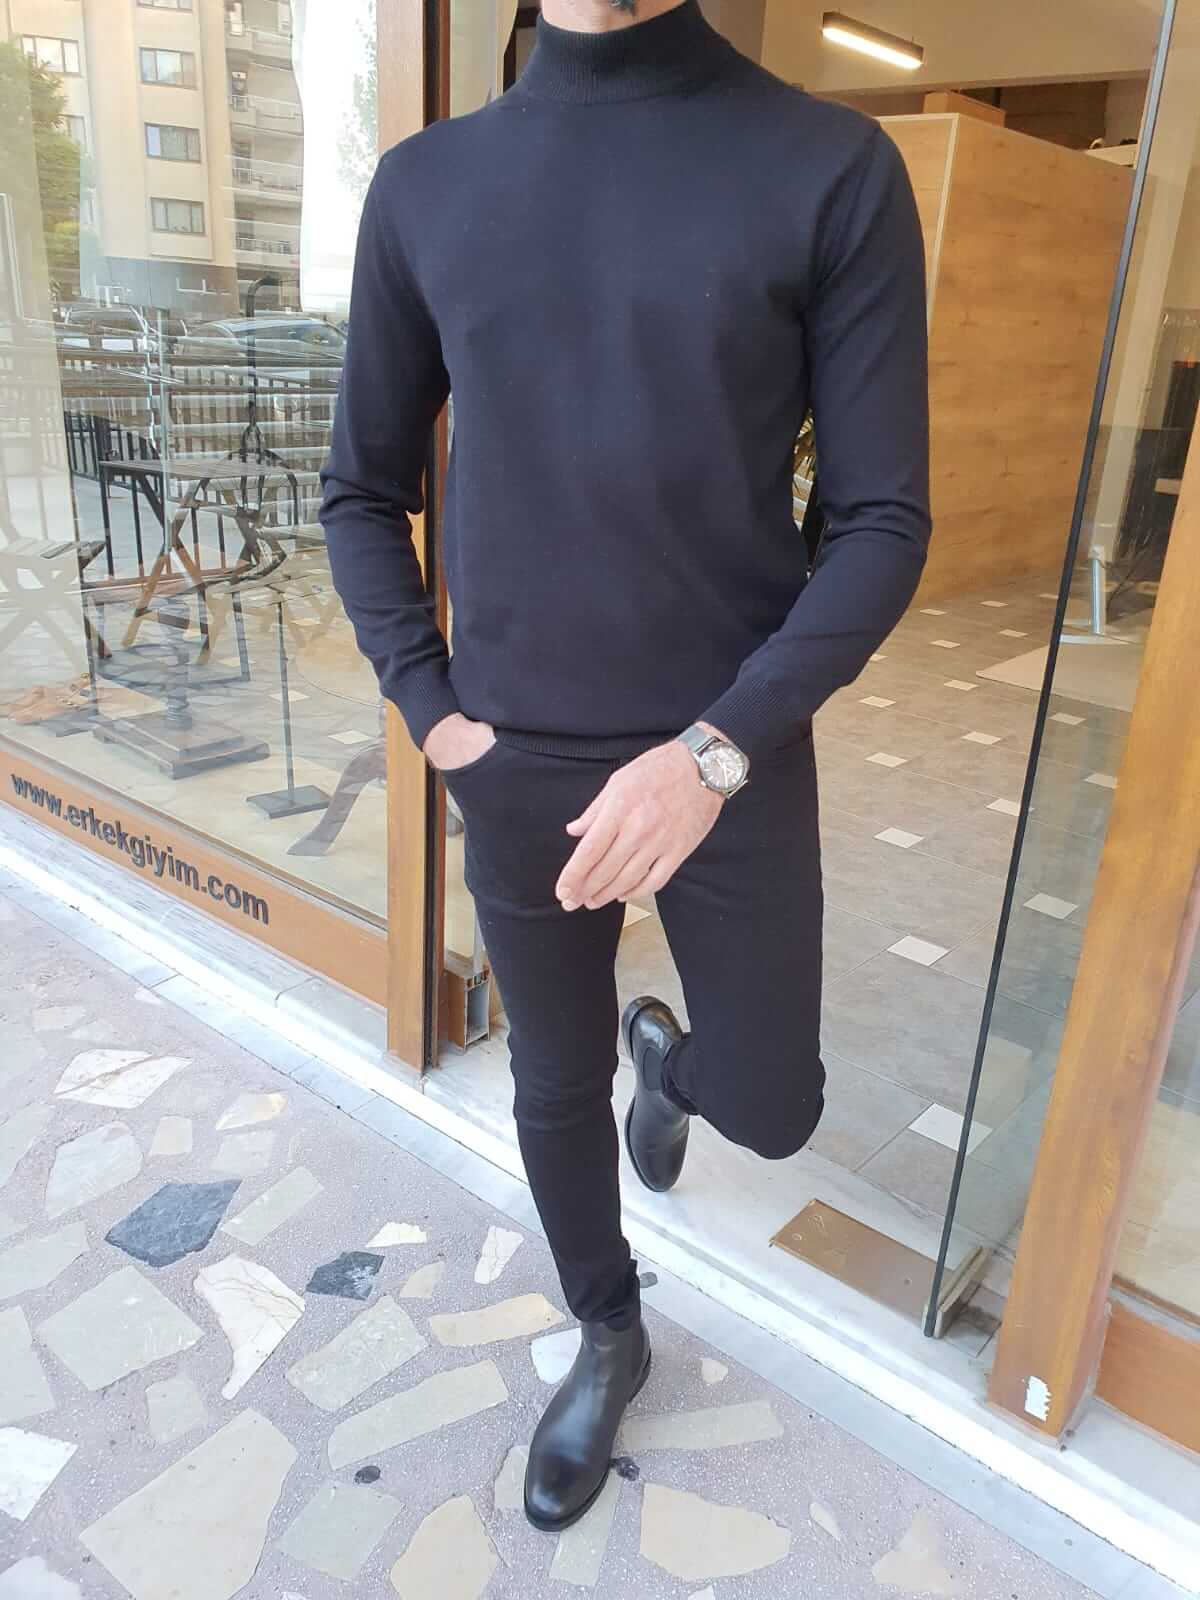 "Vale Black Turtleneck: A sleek and stylish black turtleneck sweater made from soft, high-quality fabric.